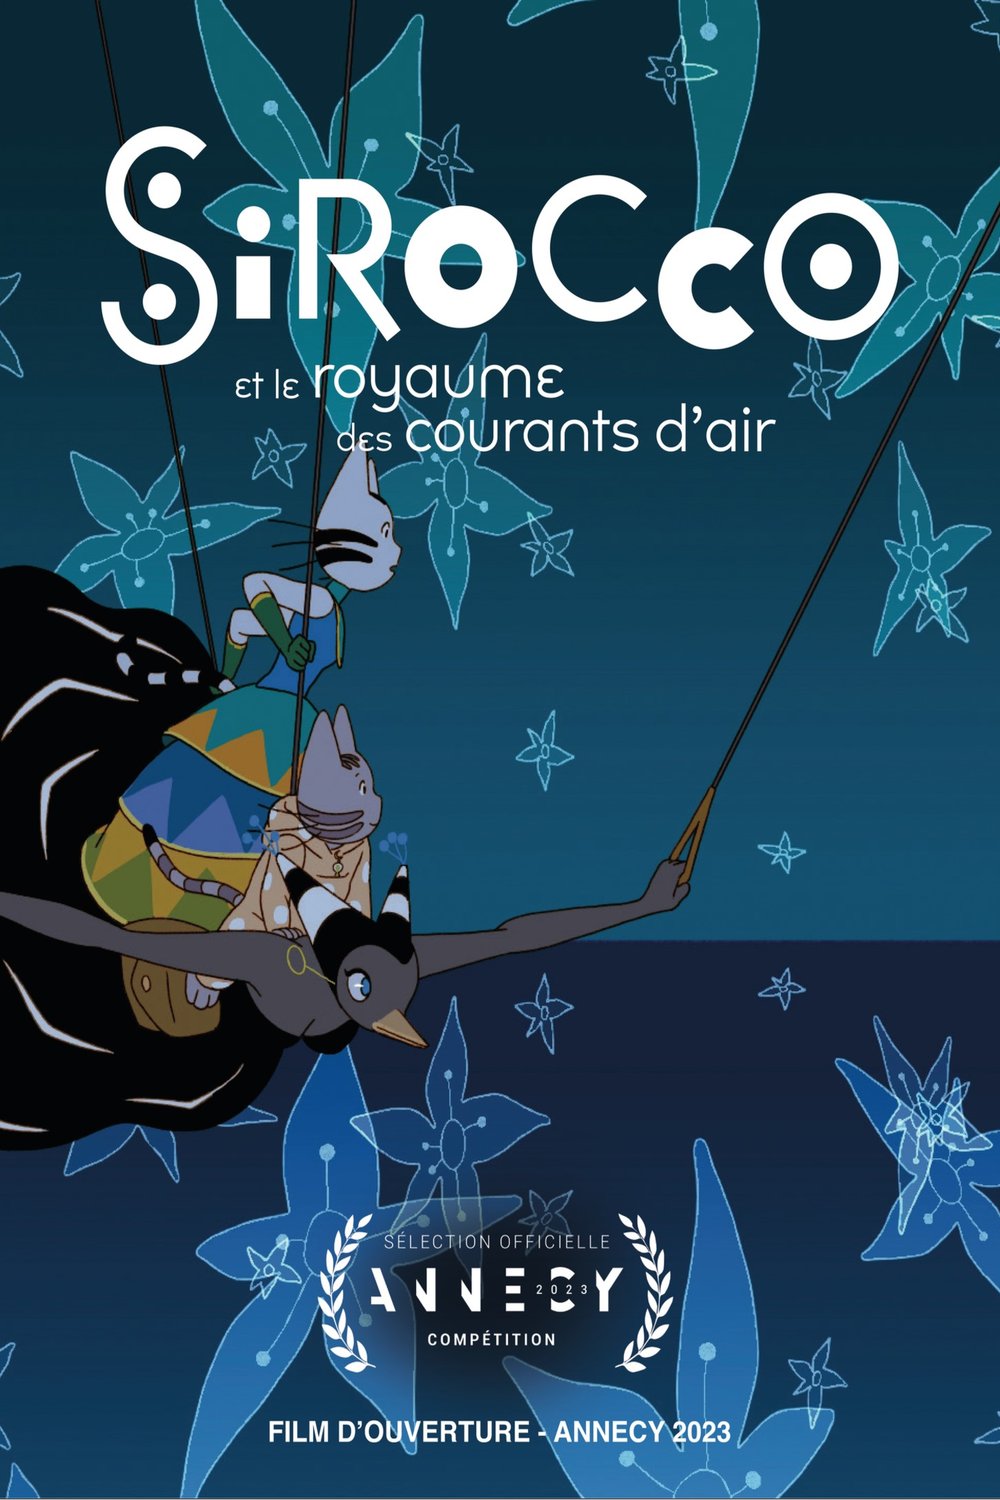 Poster of the movie Sirocco et le royaume des courants d'air